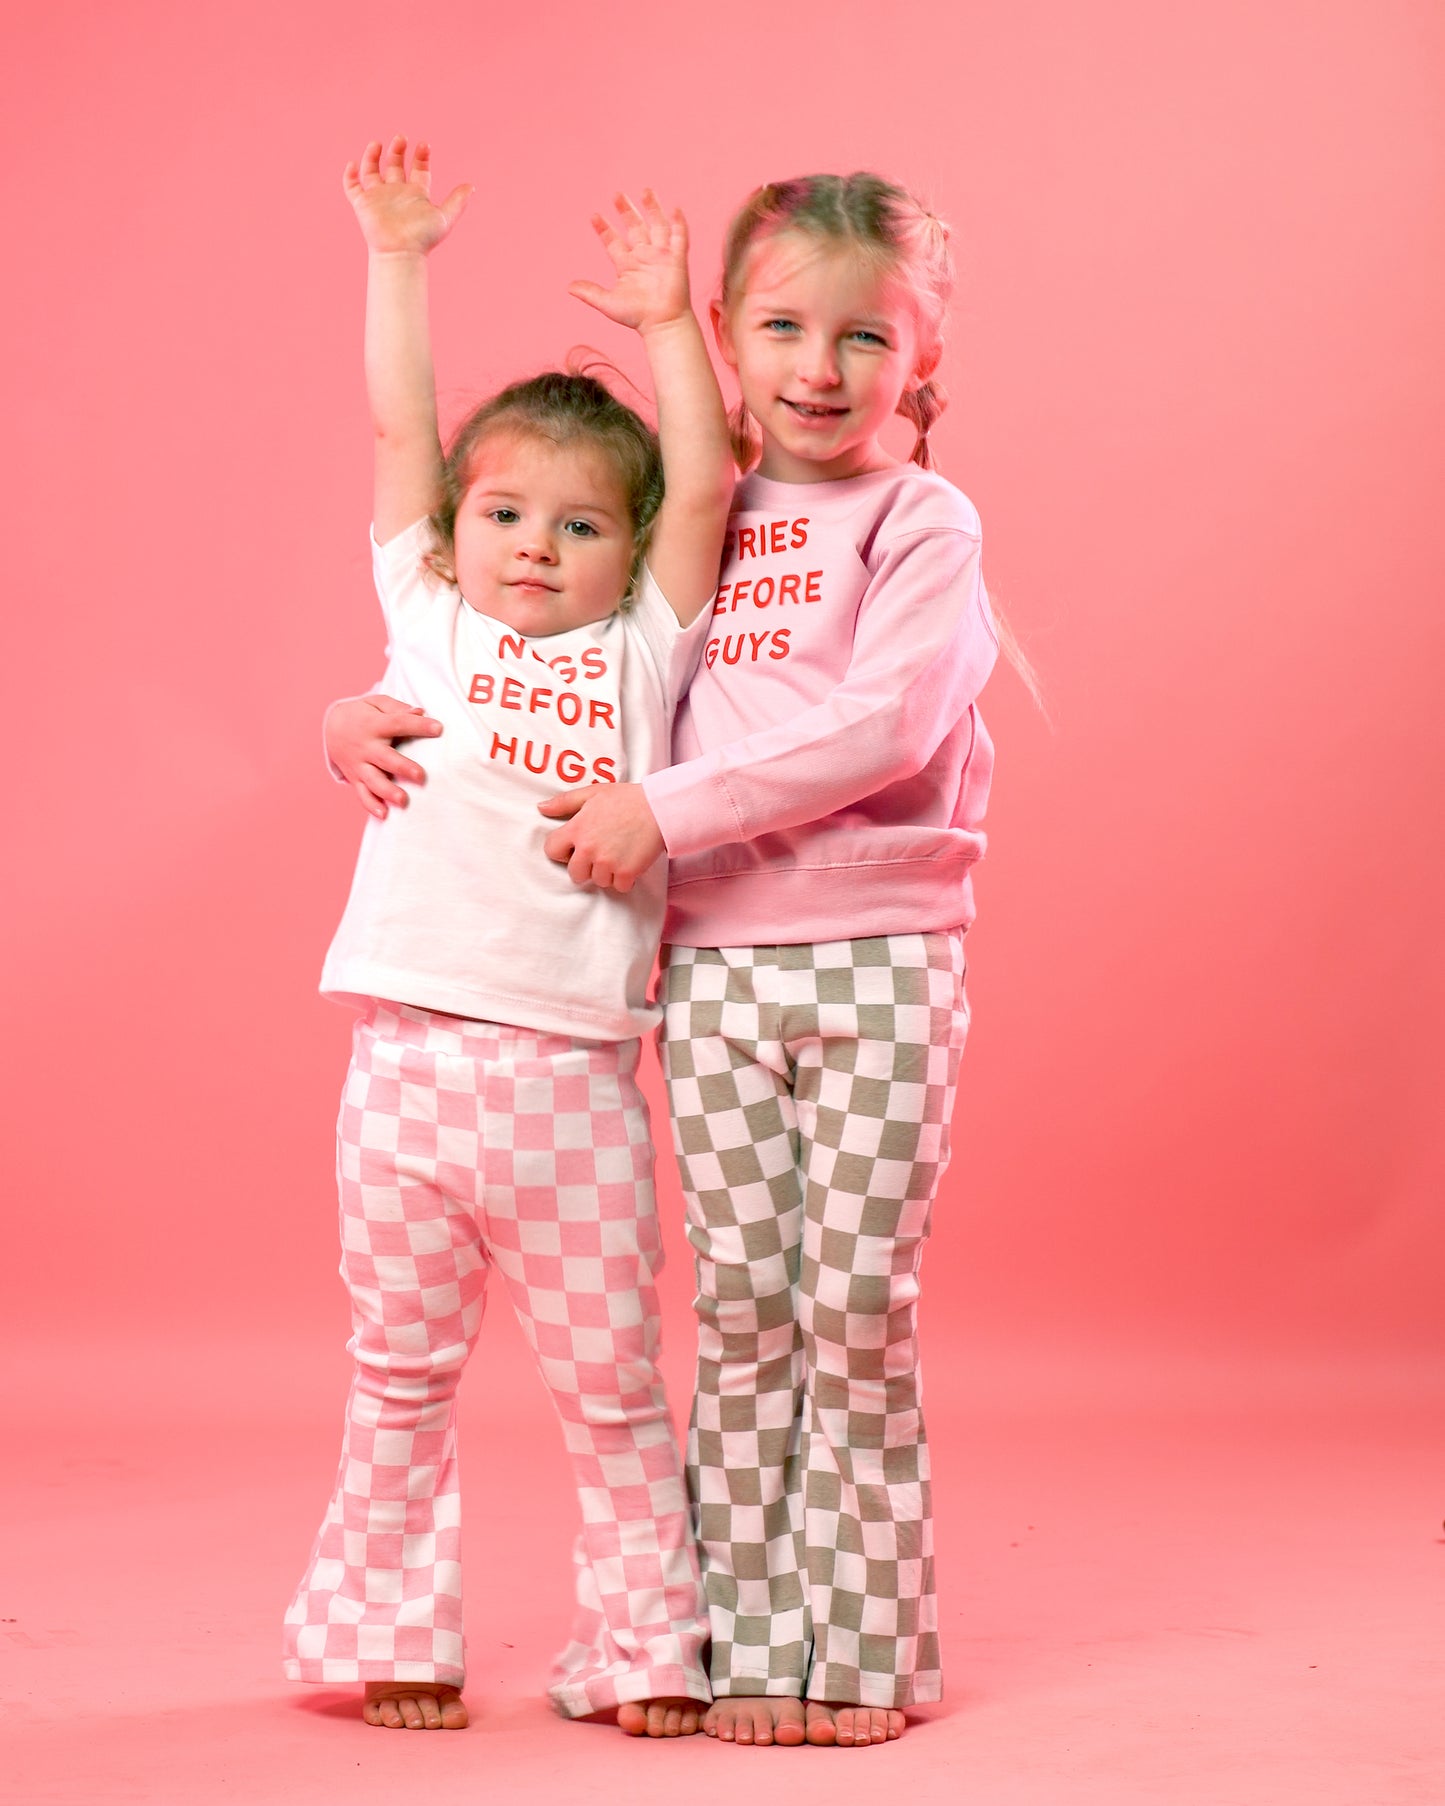 Checkered Flare Pants - Pink